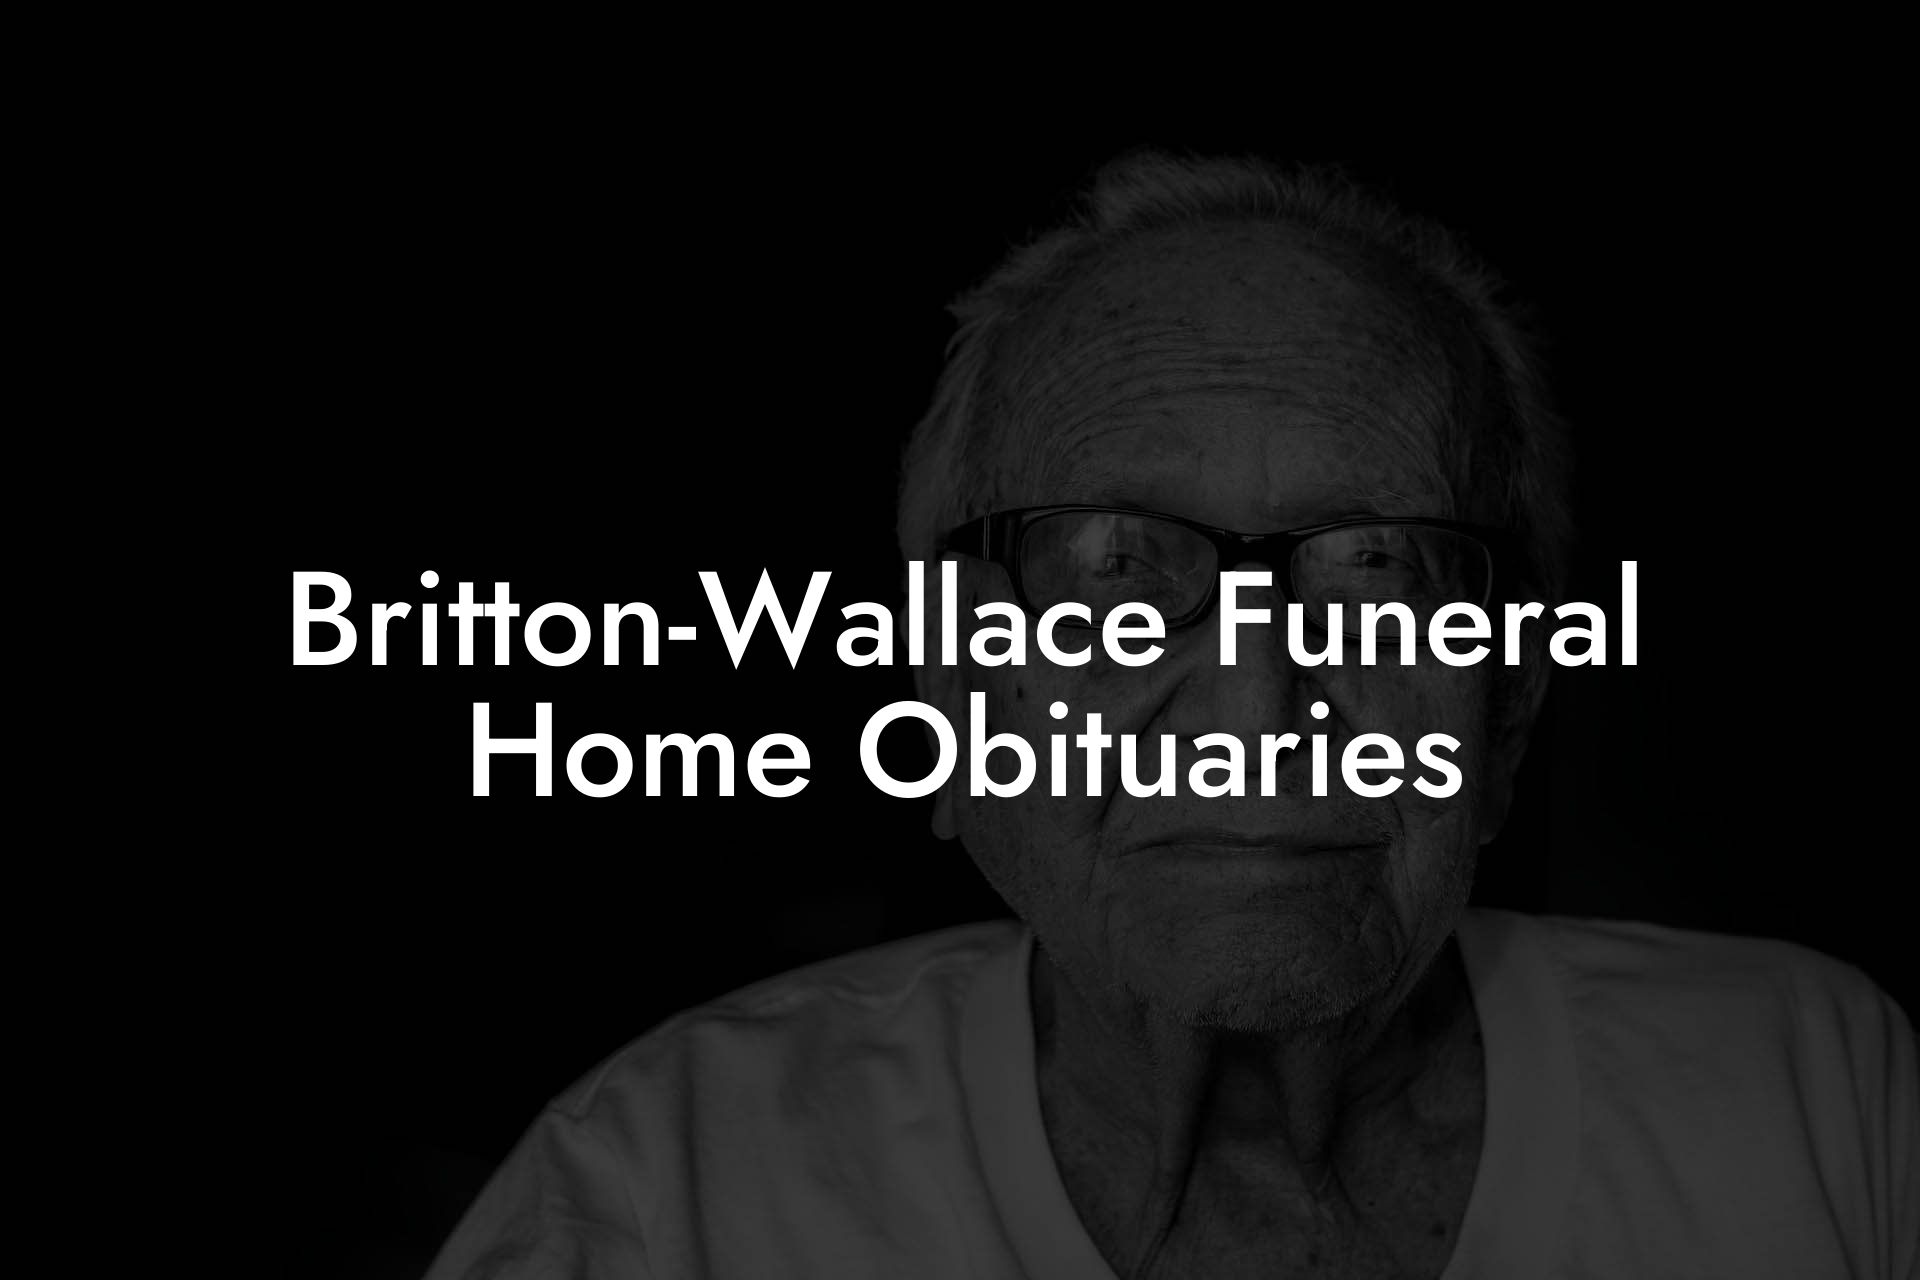 Britton-Wallace Funeral Home Obituaries